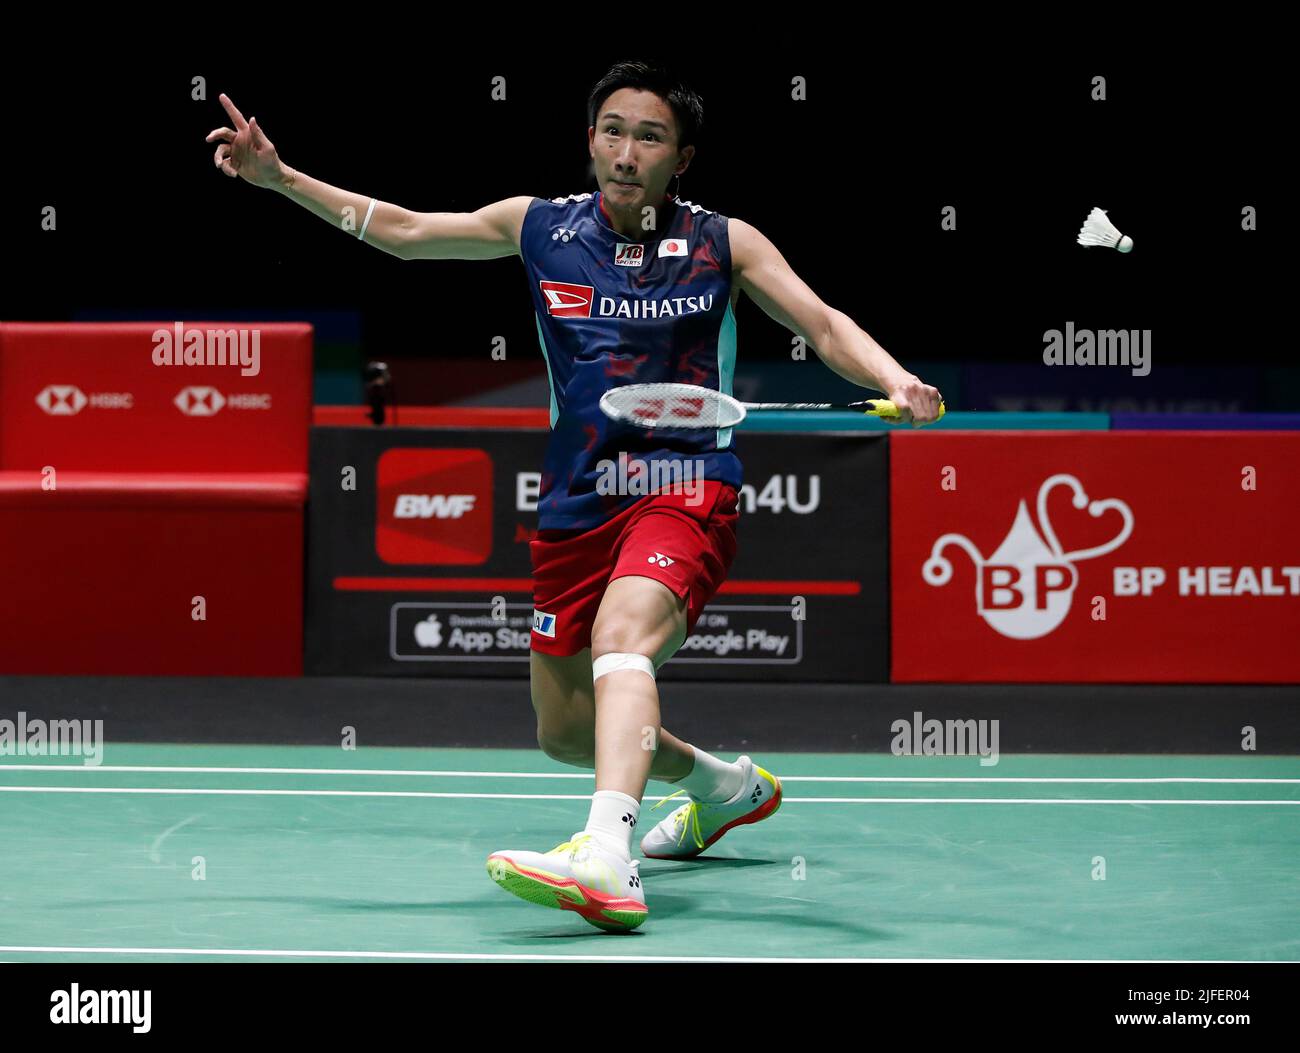 Kento Momota of Japan competes against Kunlavut Vitidsarn of Thailand during the Mens Single semi-finals match of the Petronas Malaysia Open 2022 at Axiata Arena, Bukit Jalil